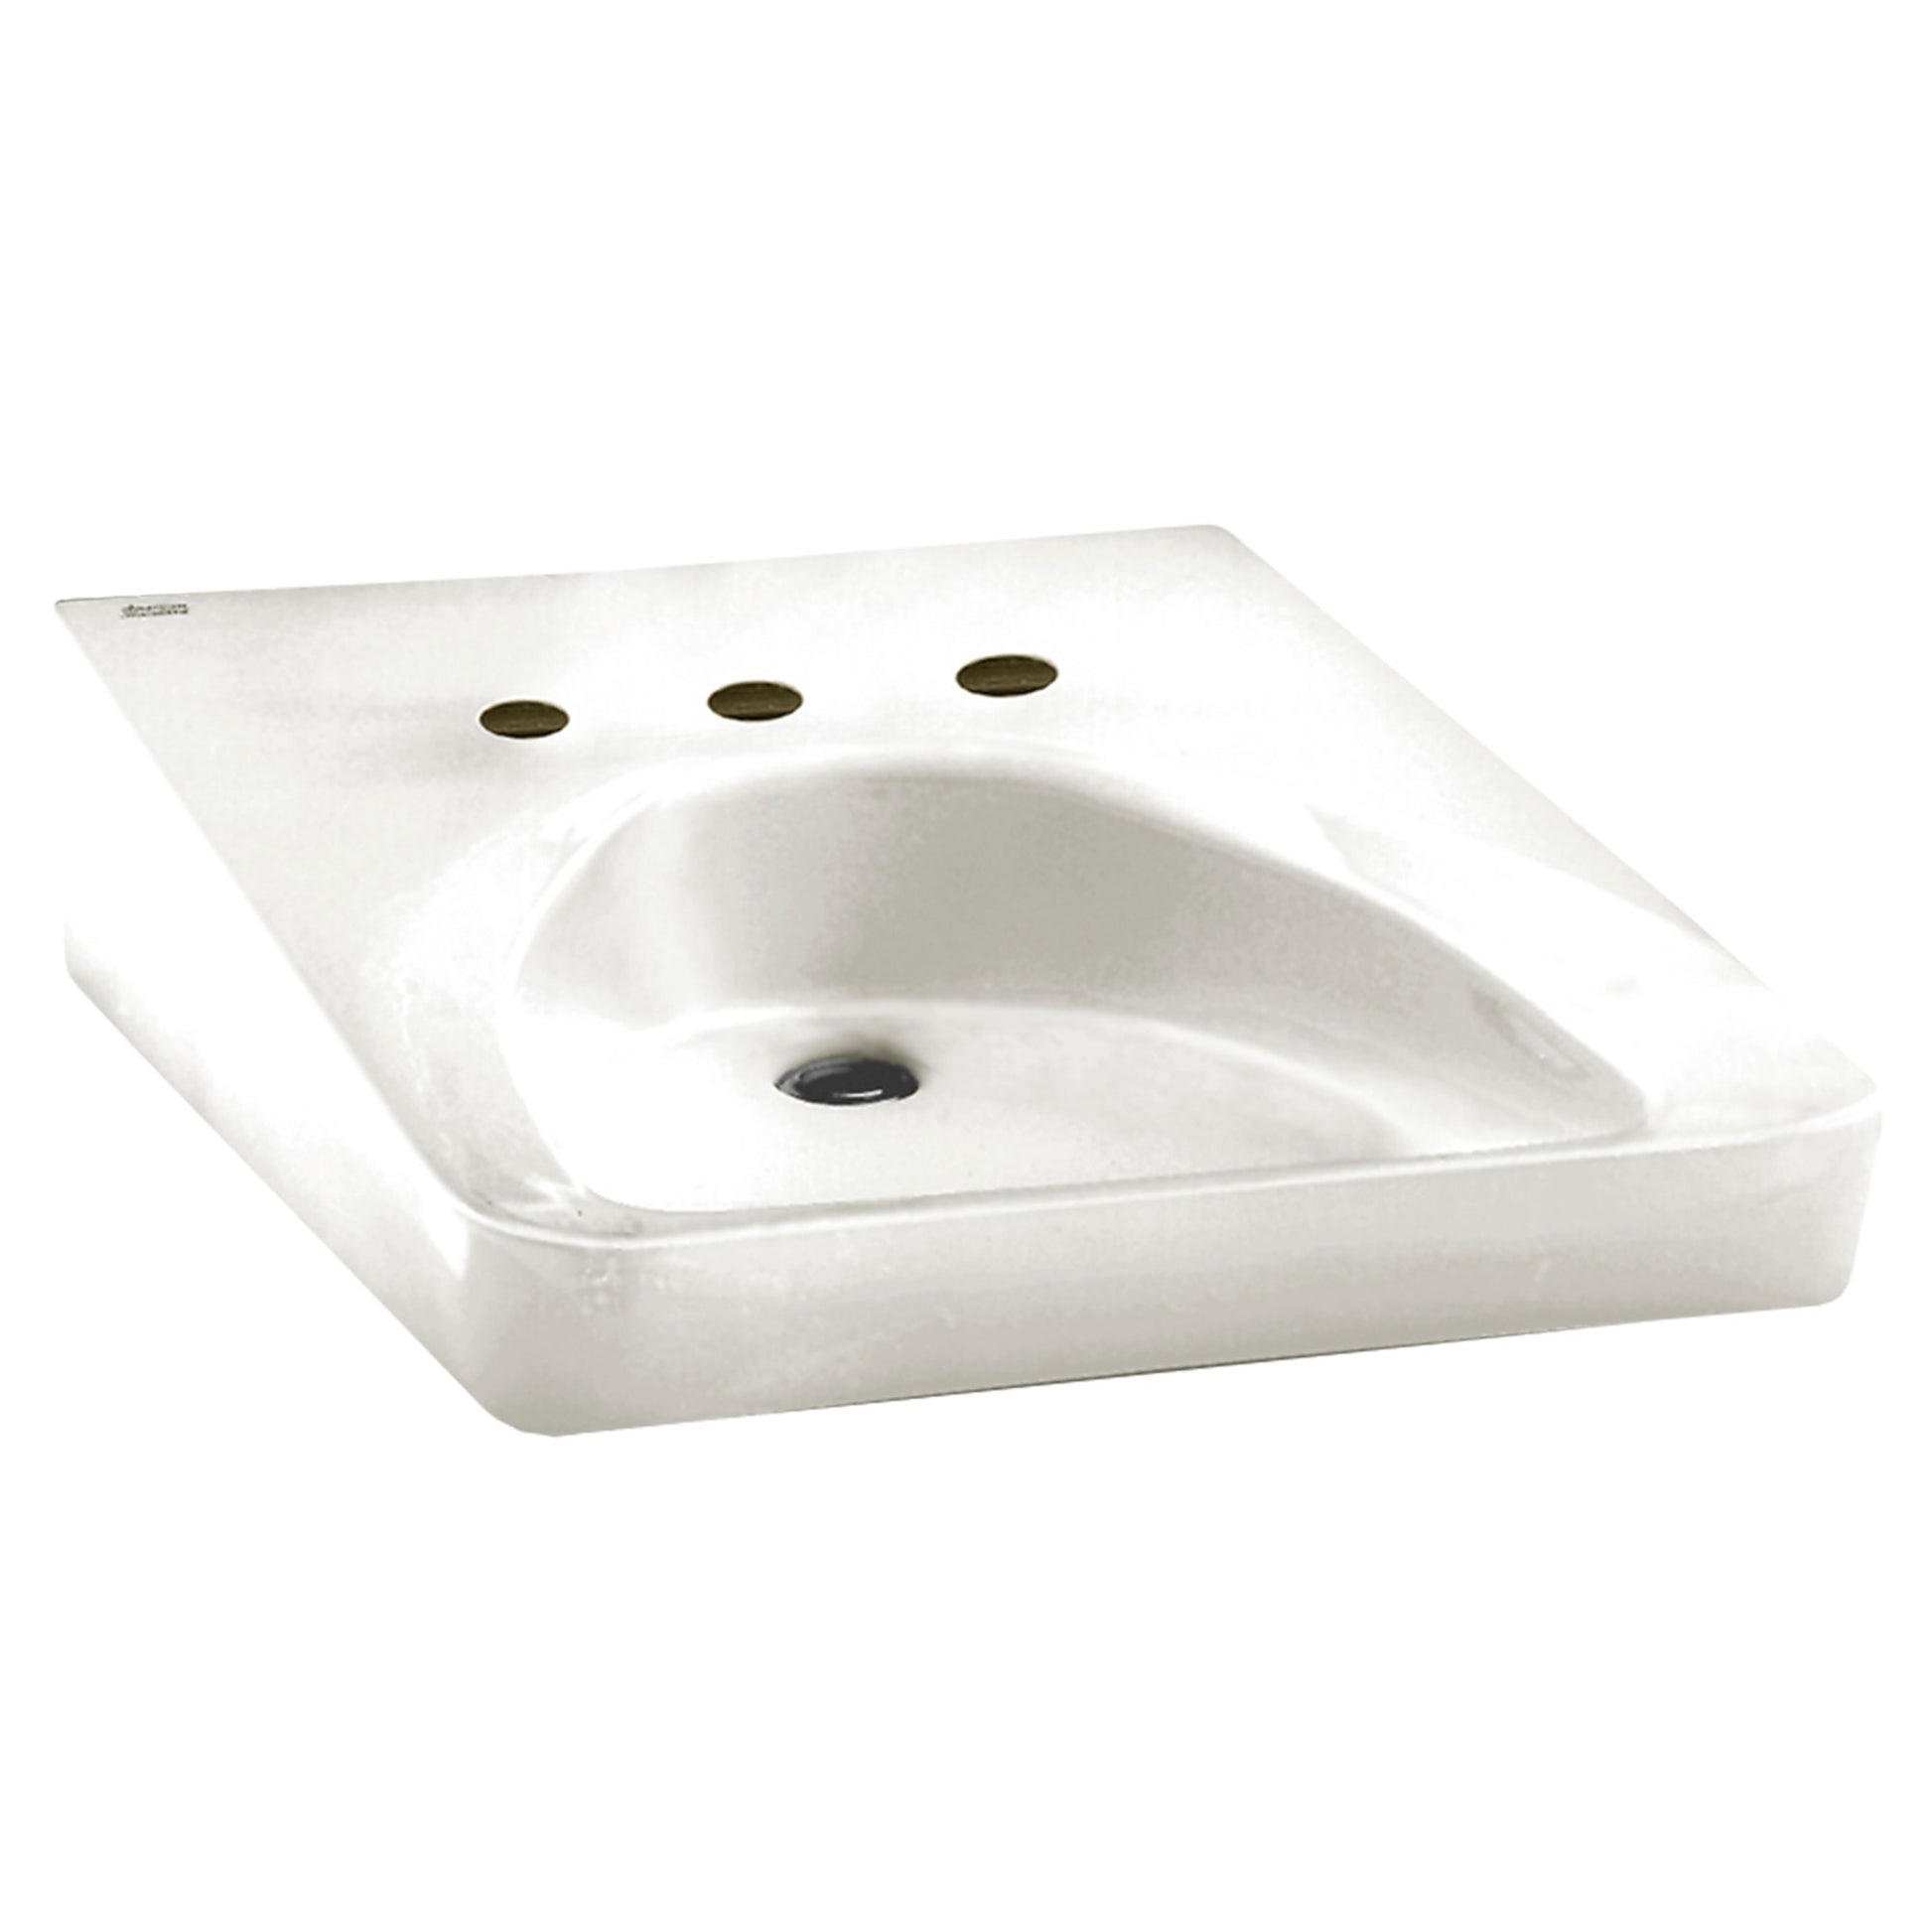 AMERICAN-STANDARD 9140013.020, Wheelchair Wall-Hung Sink With 10-1/2-Inch Widespread in White